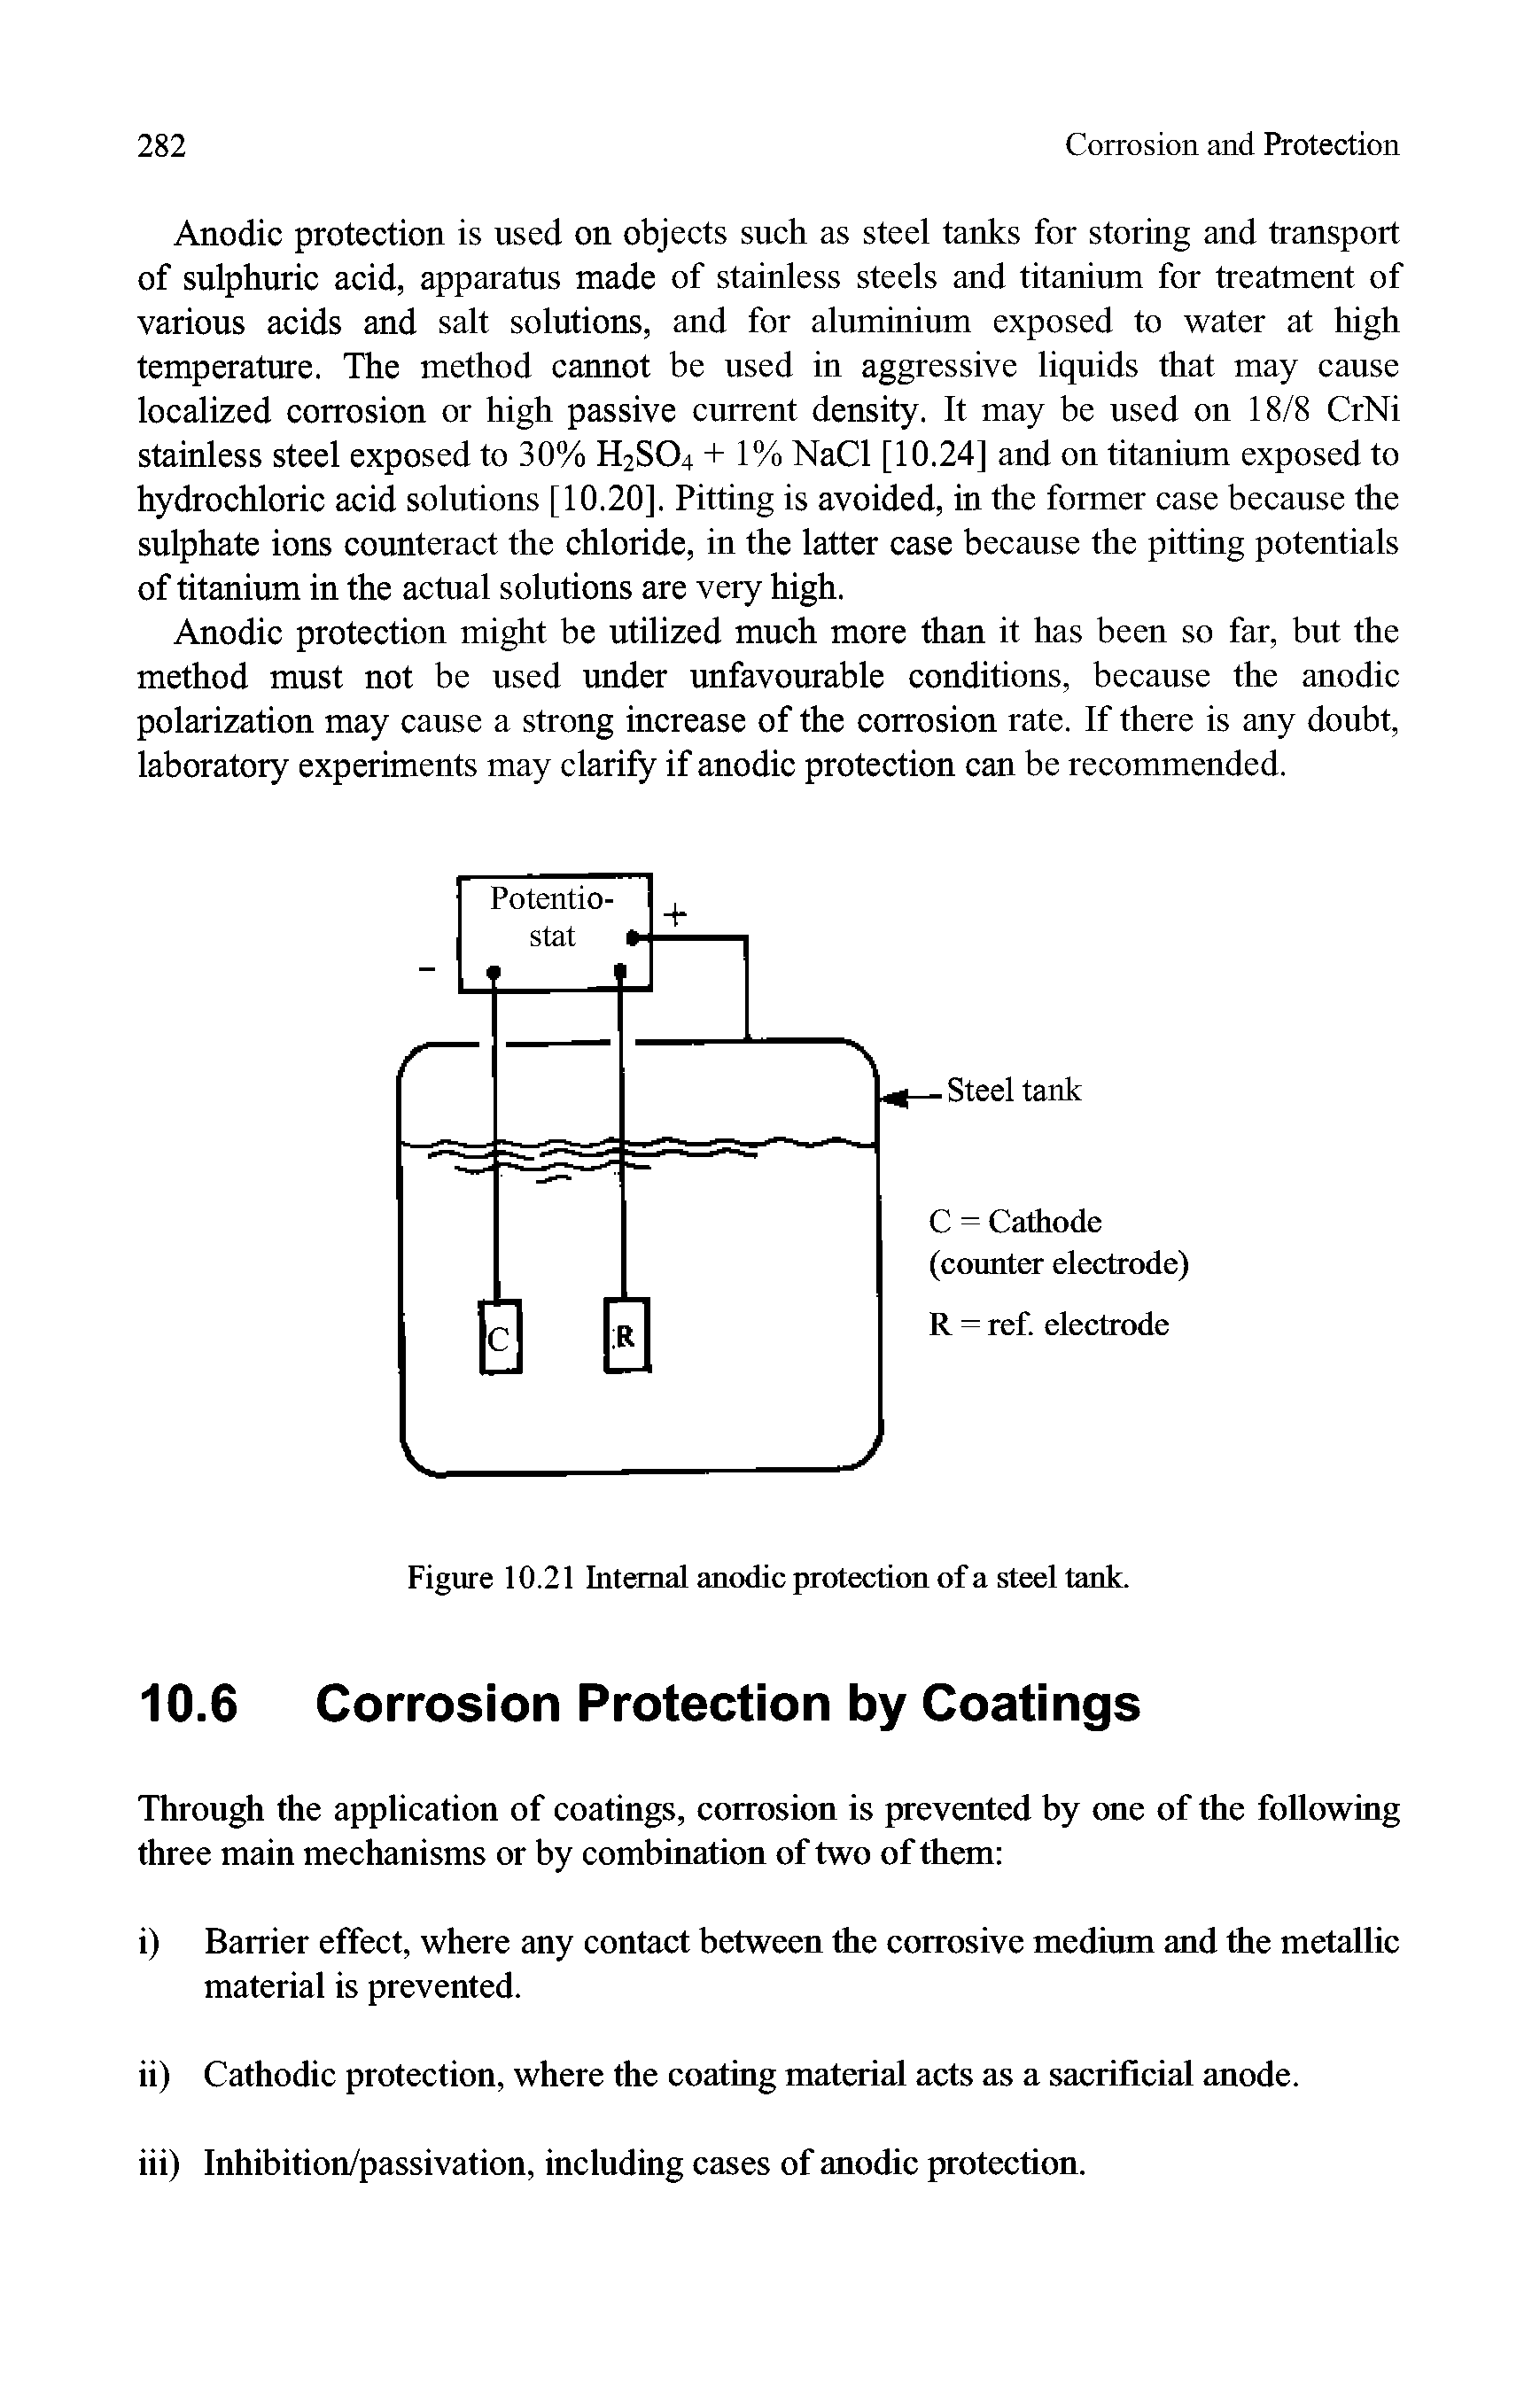 Figure 10.21 Internal anodic protection of a steel tank.